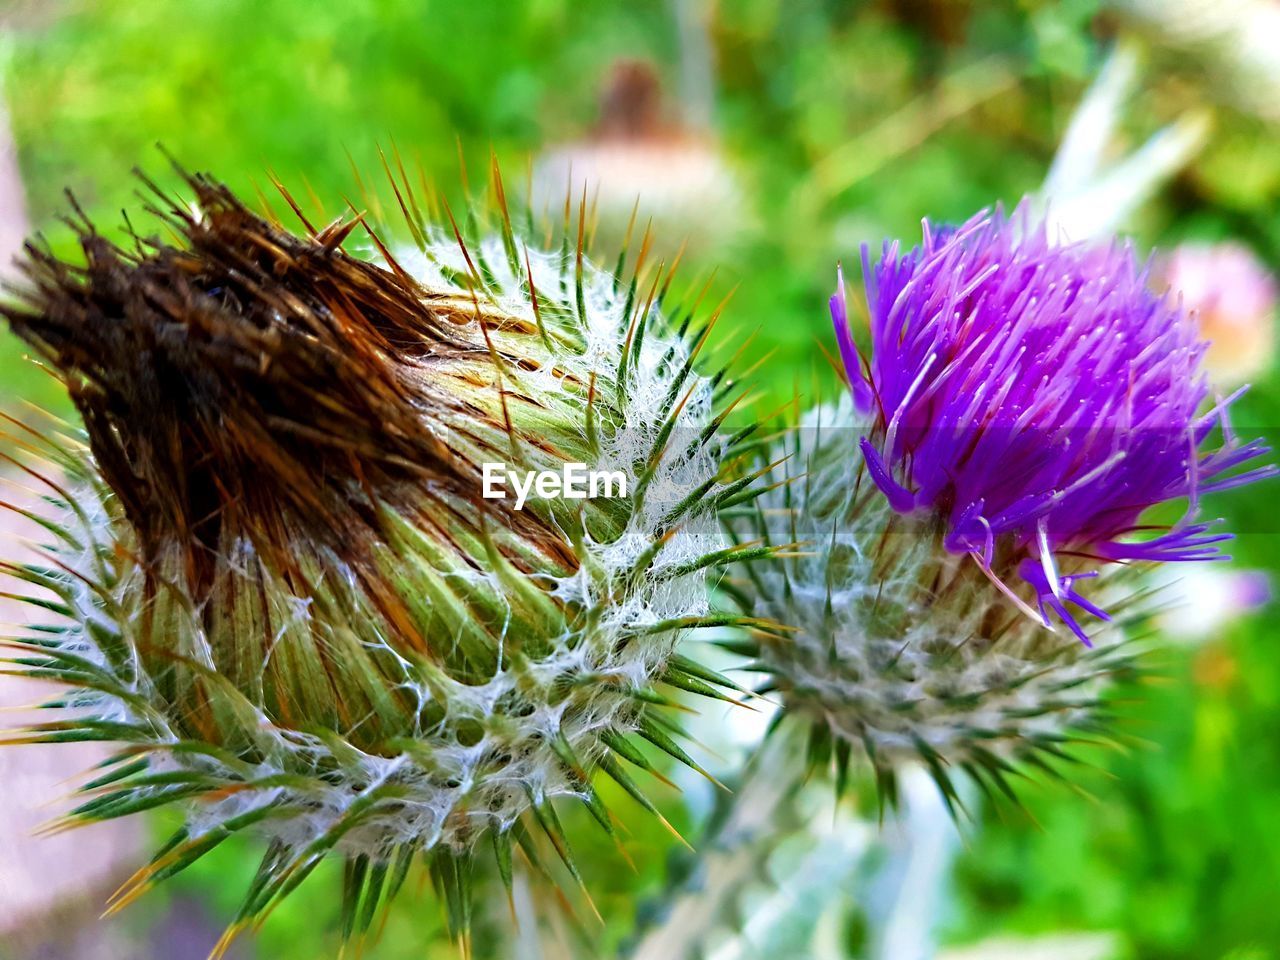 CLOSE-UP OF THISTLE AGAINST PURPLE FLOWERS